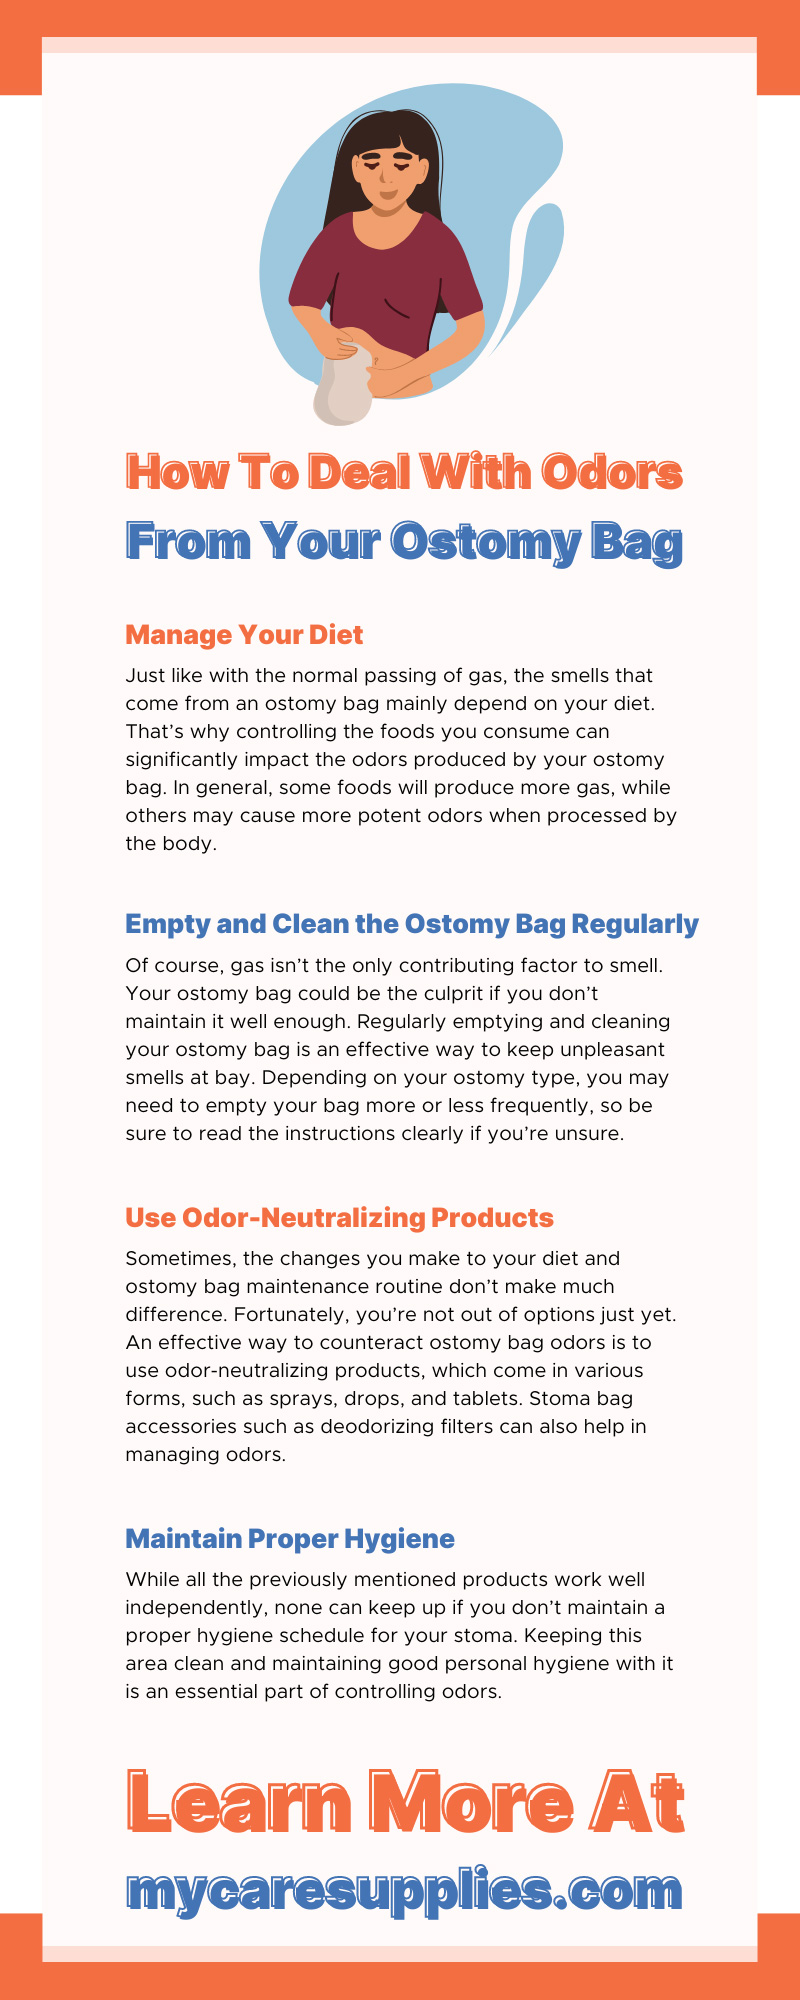 How To Deal With Odors From Your Ostomy Bag